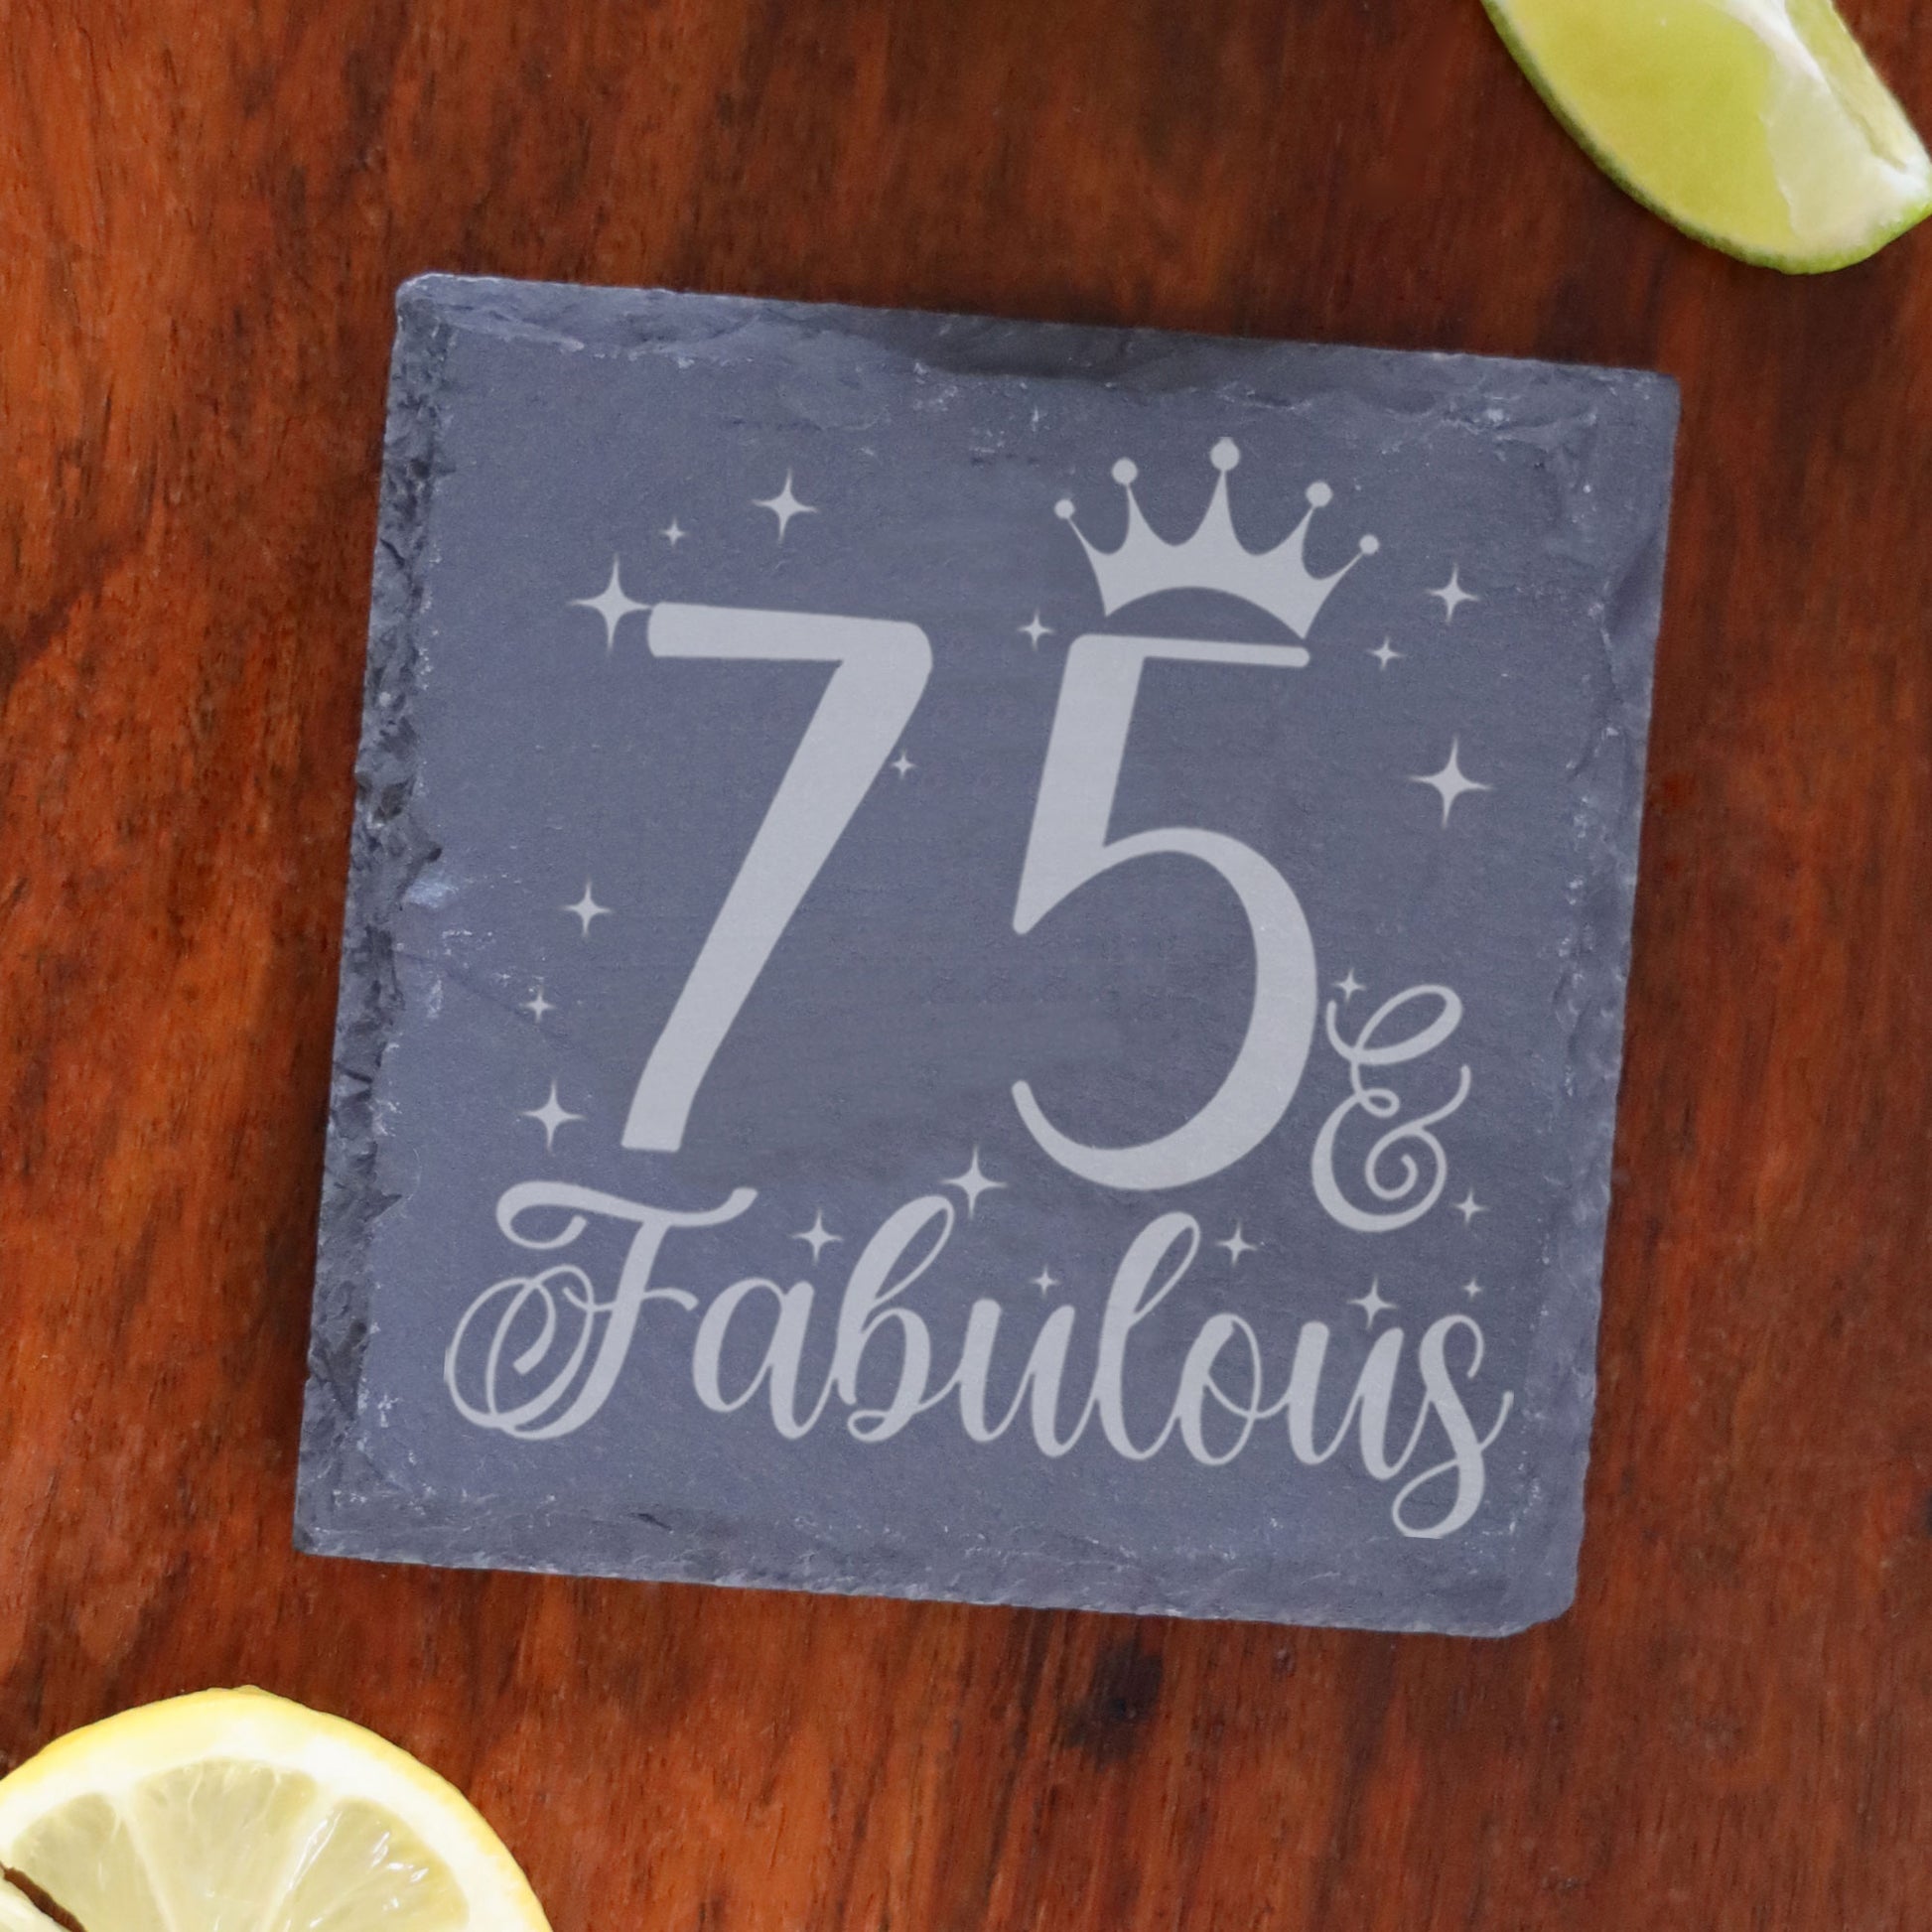 75 & Fabulous 75th Birthday Gift Engraved Wine Glass and/or Coaster Set  - Always Looking Good - Square Coaster Only  